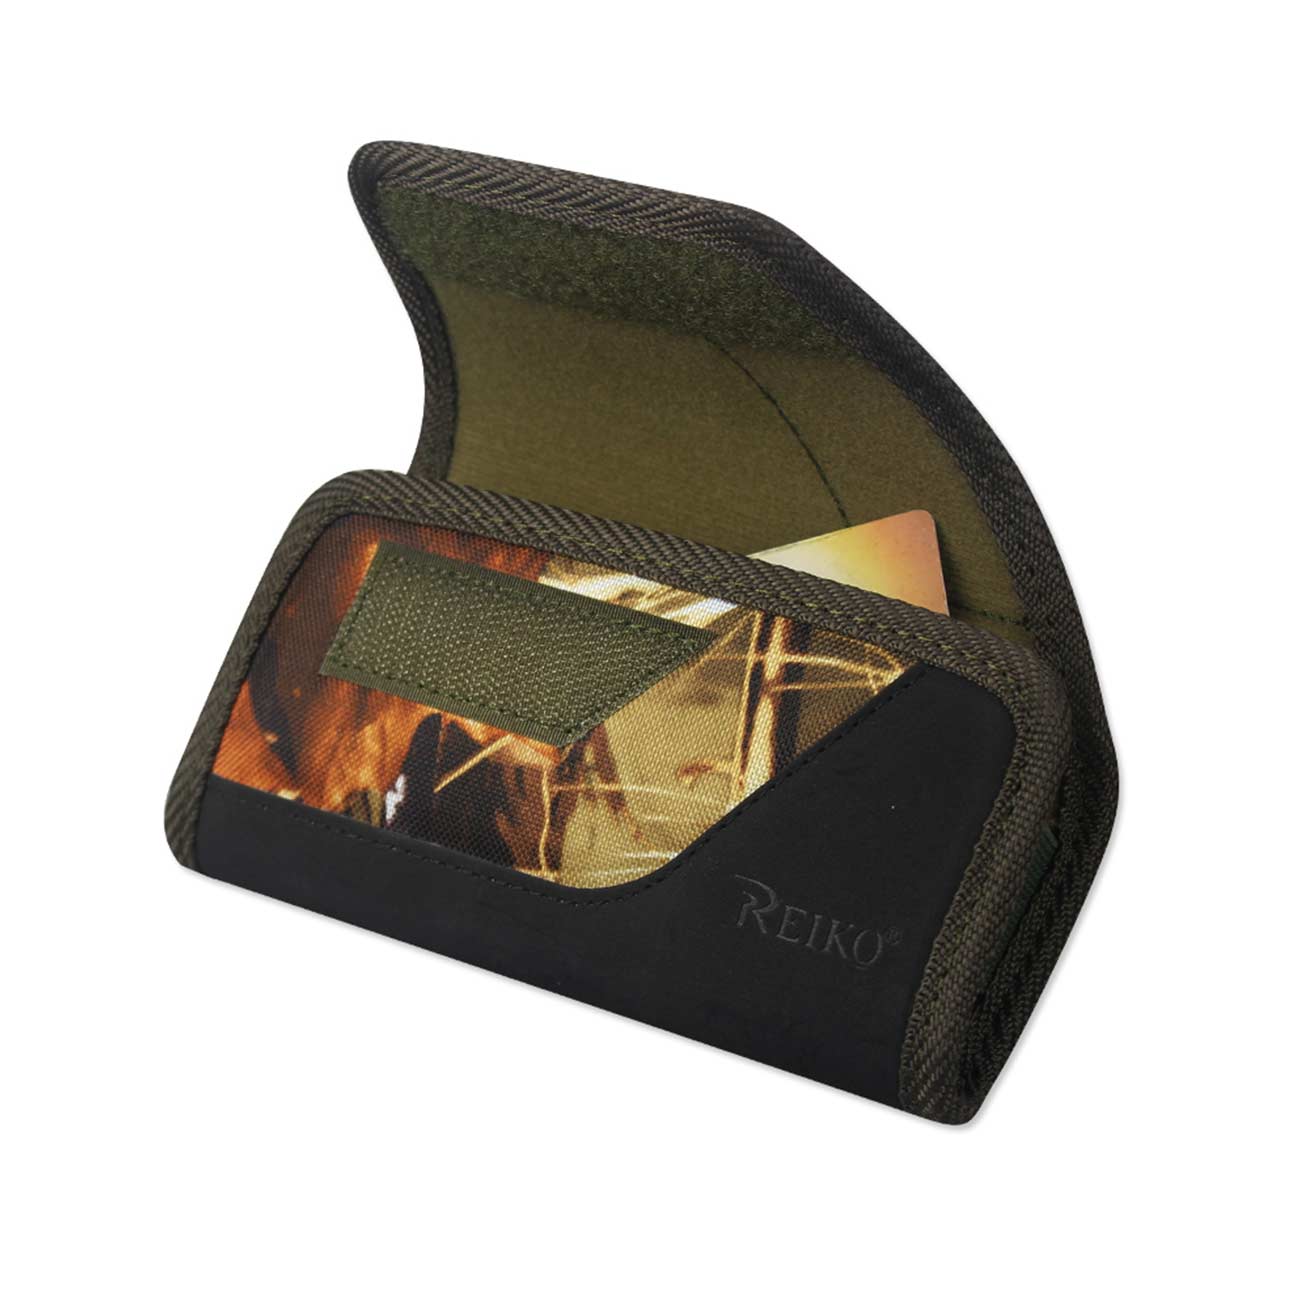 Rugged Pouch/Phone Holster With Card Holder In Camouflage